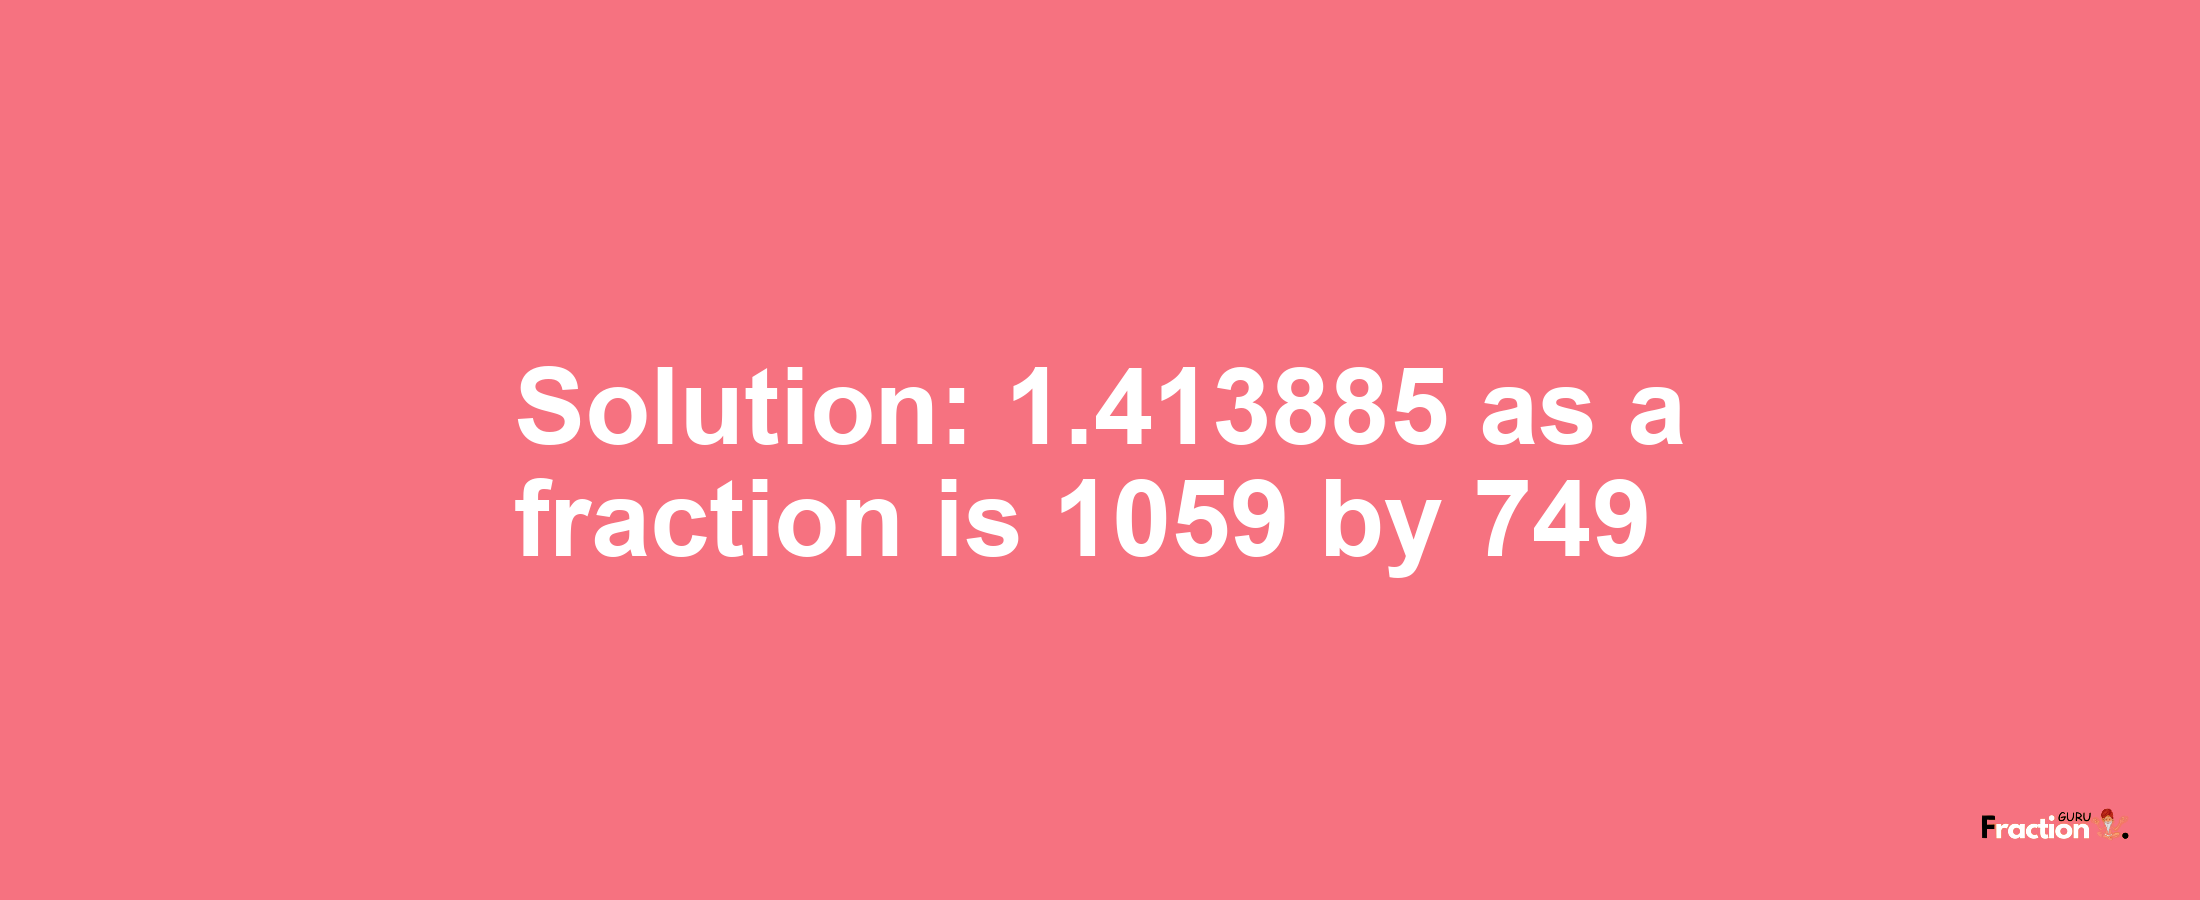 Solution:1.413885 as a fraction is 1059/749